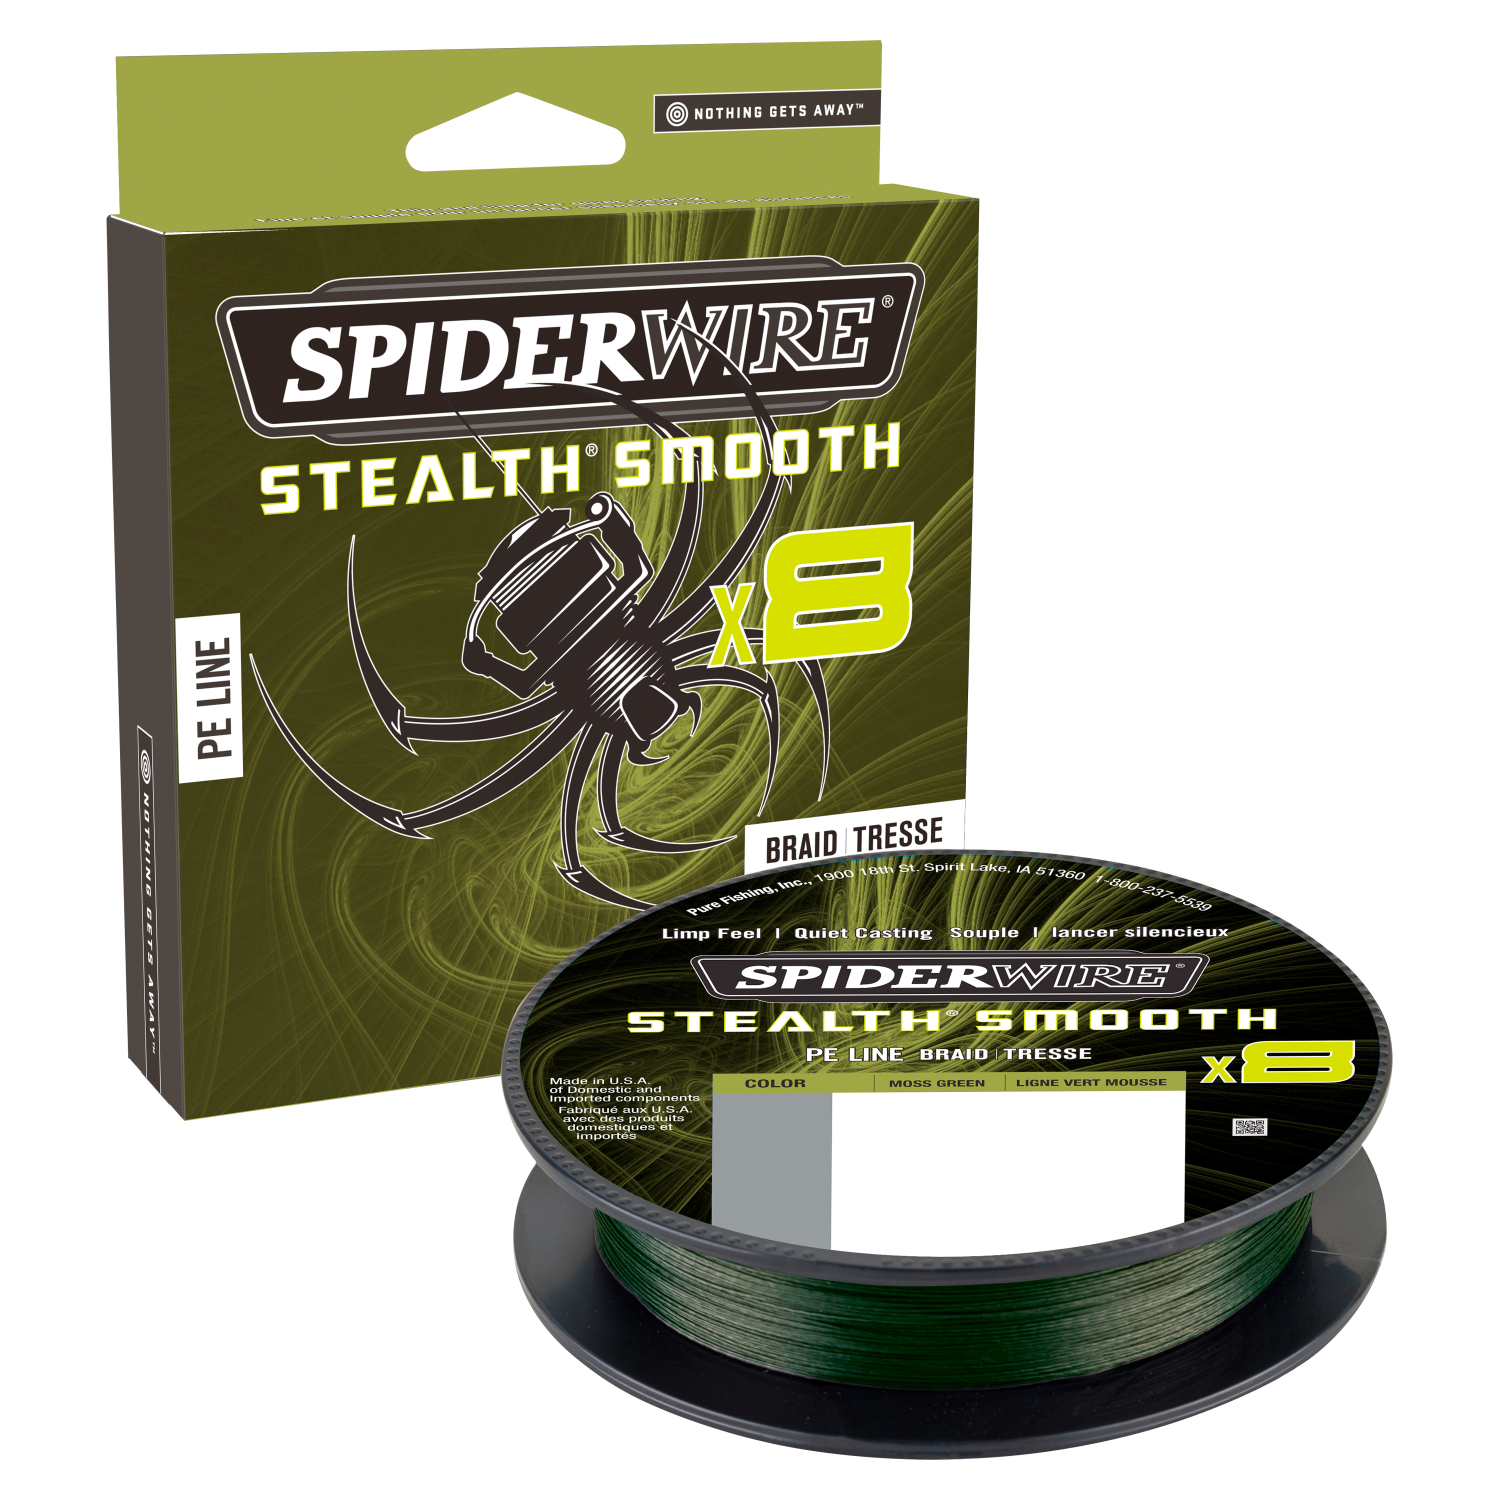 Spiderwire Fishing Line Stealth Glow-Vis Braid (Glow-Vis) at low prices